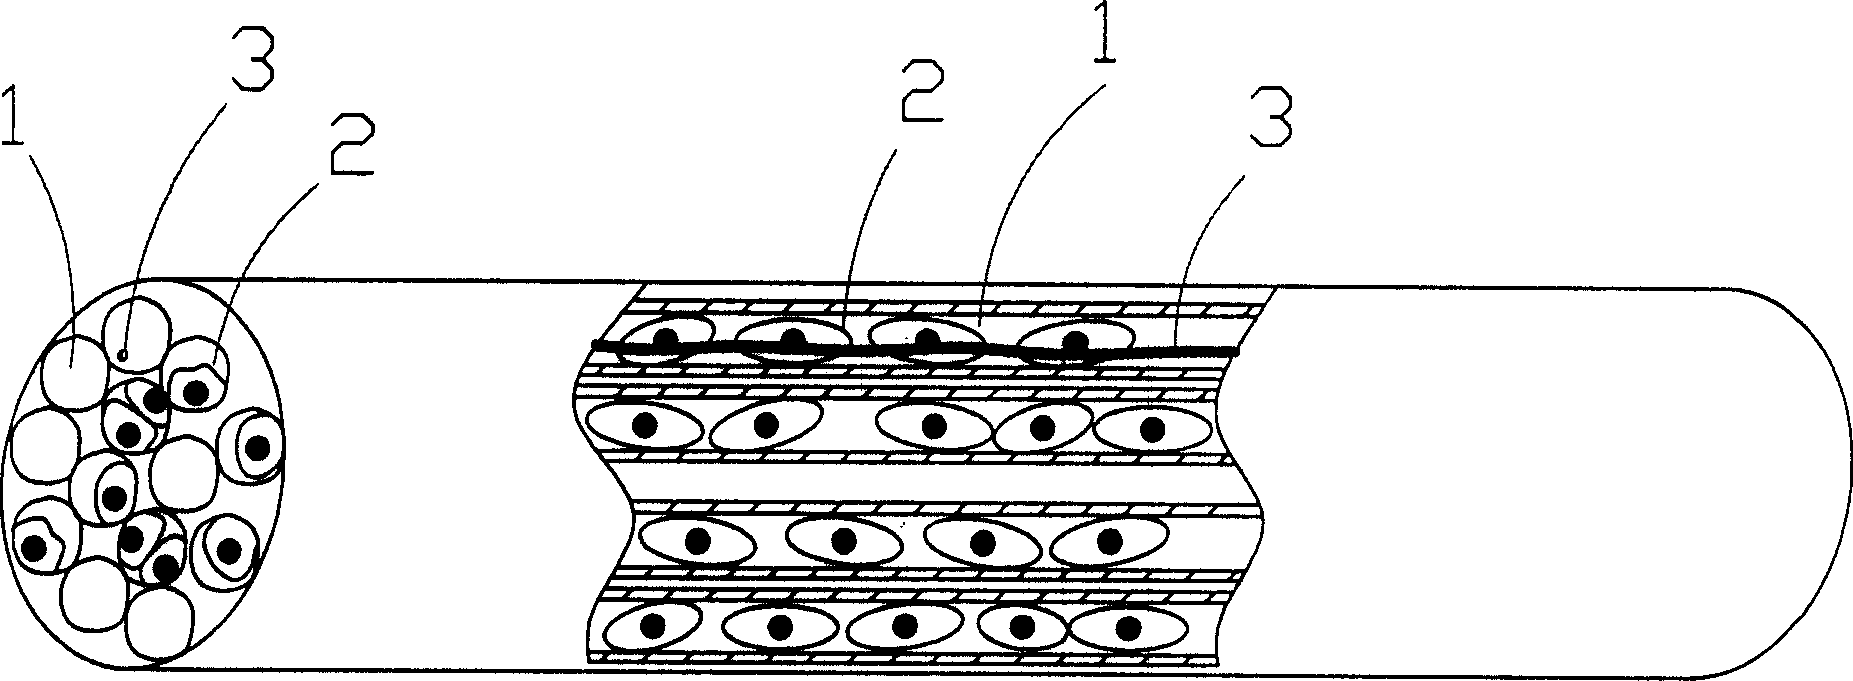 Tissue engineering bone containing innervation and its construction